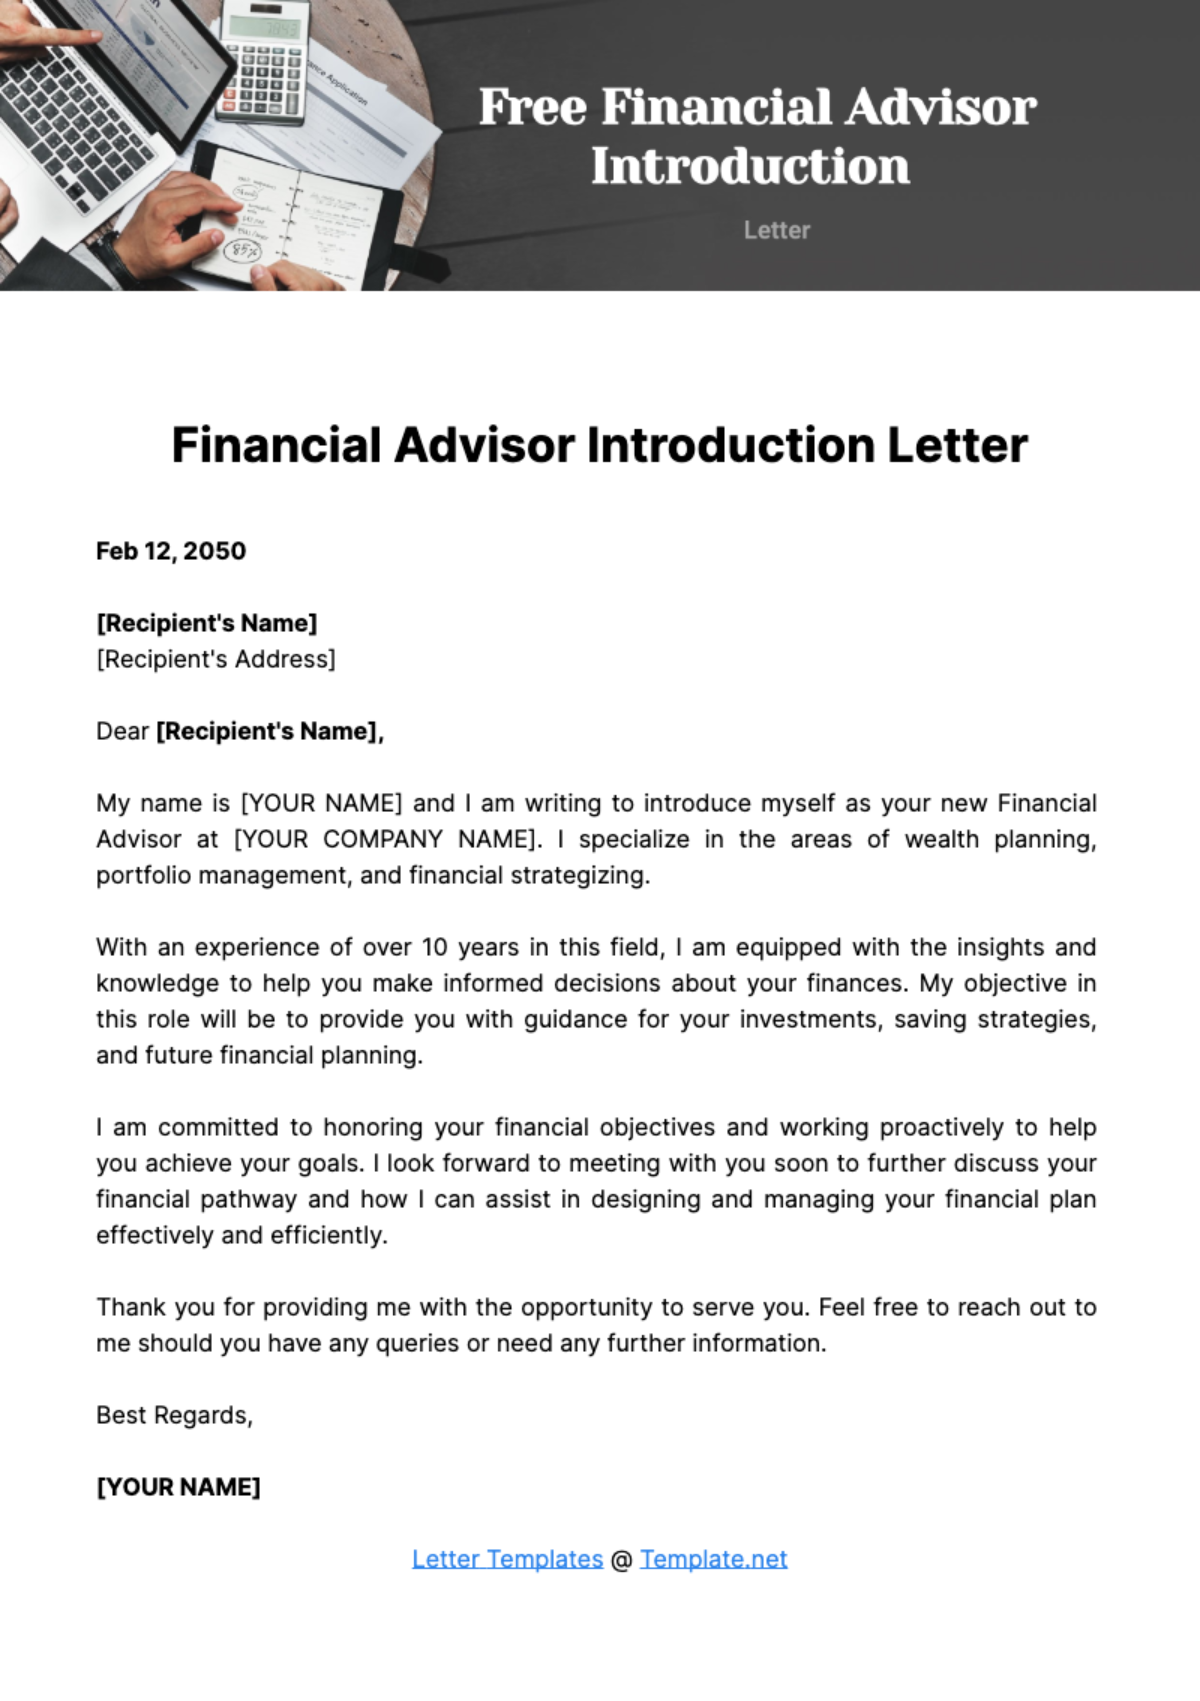 Free Financial Advisor Introduction Letter Template